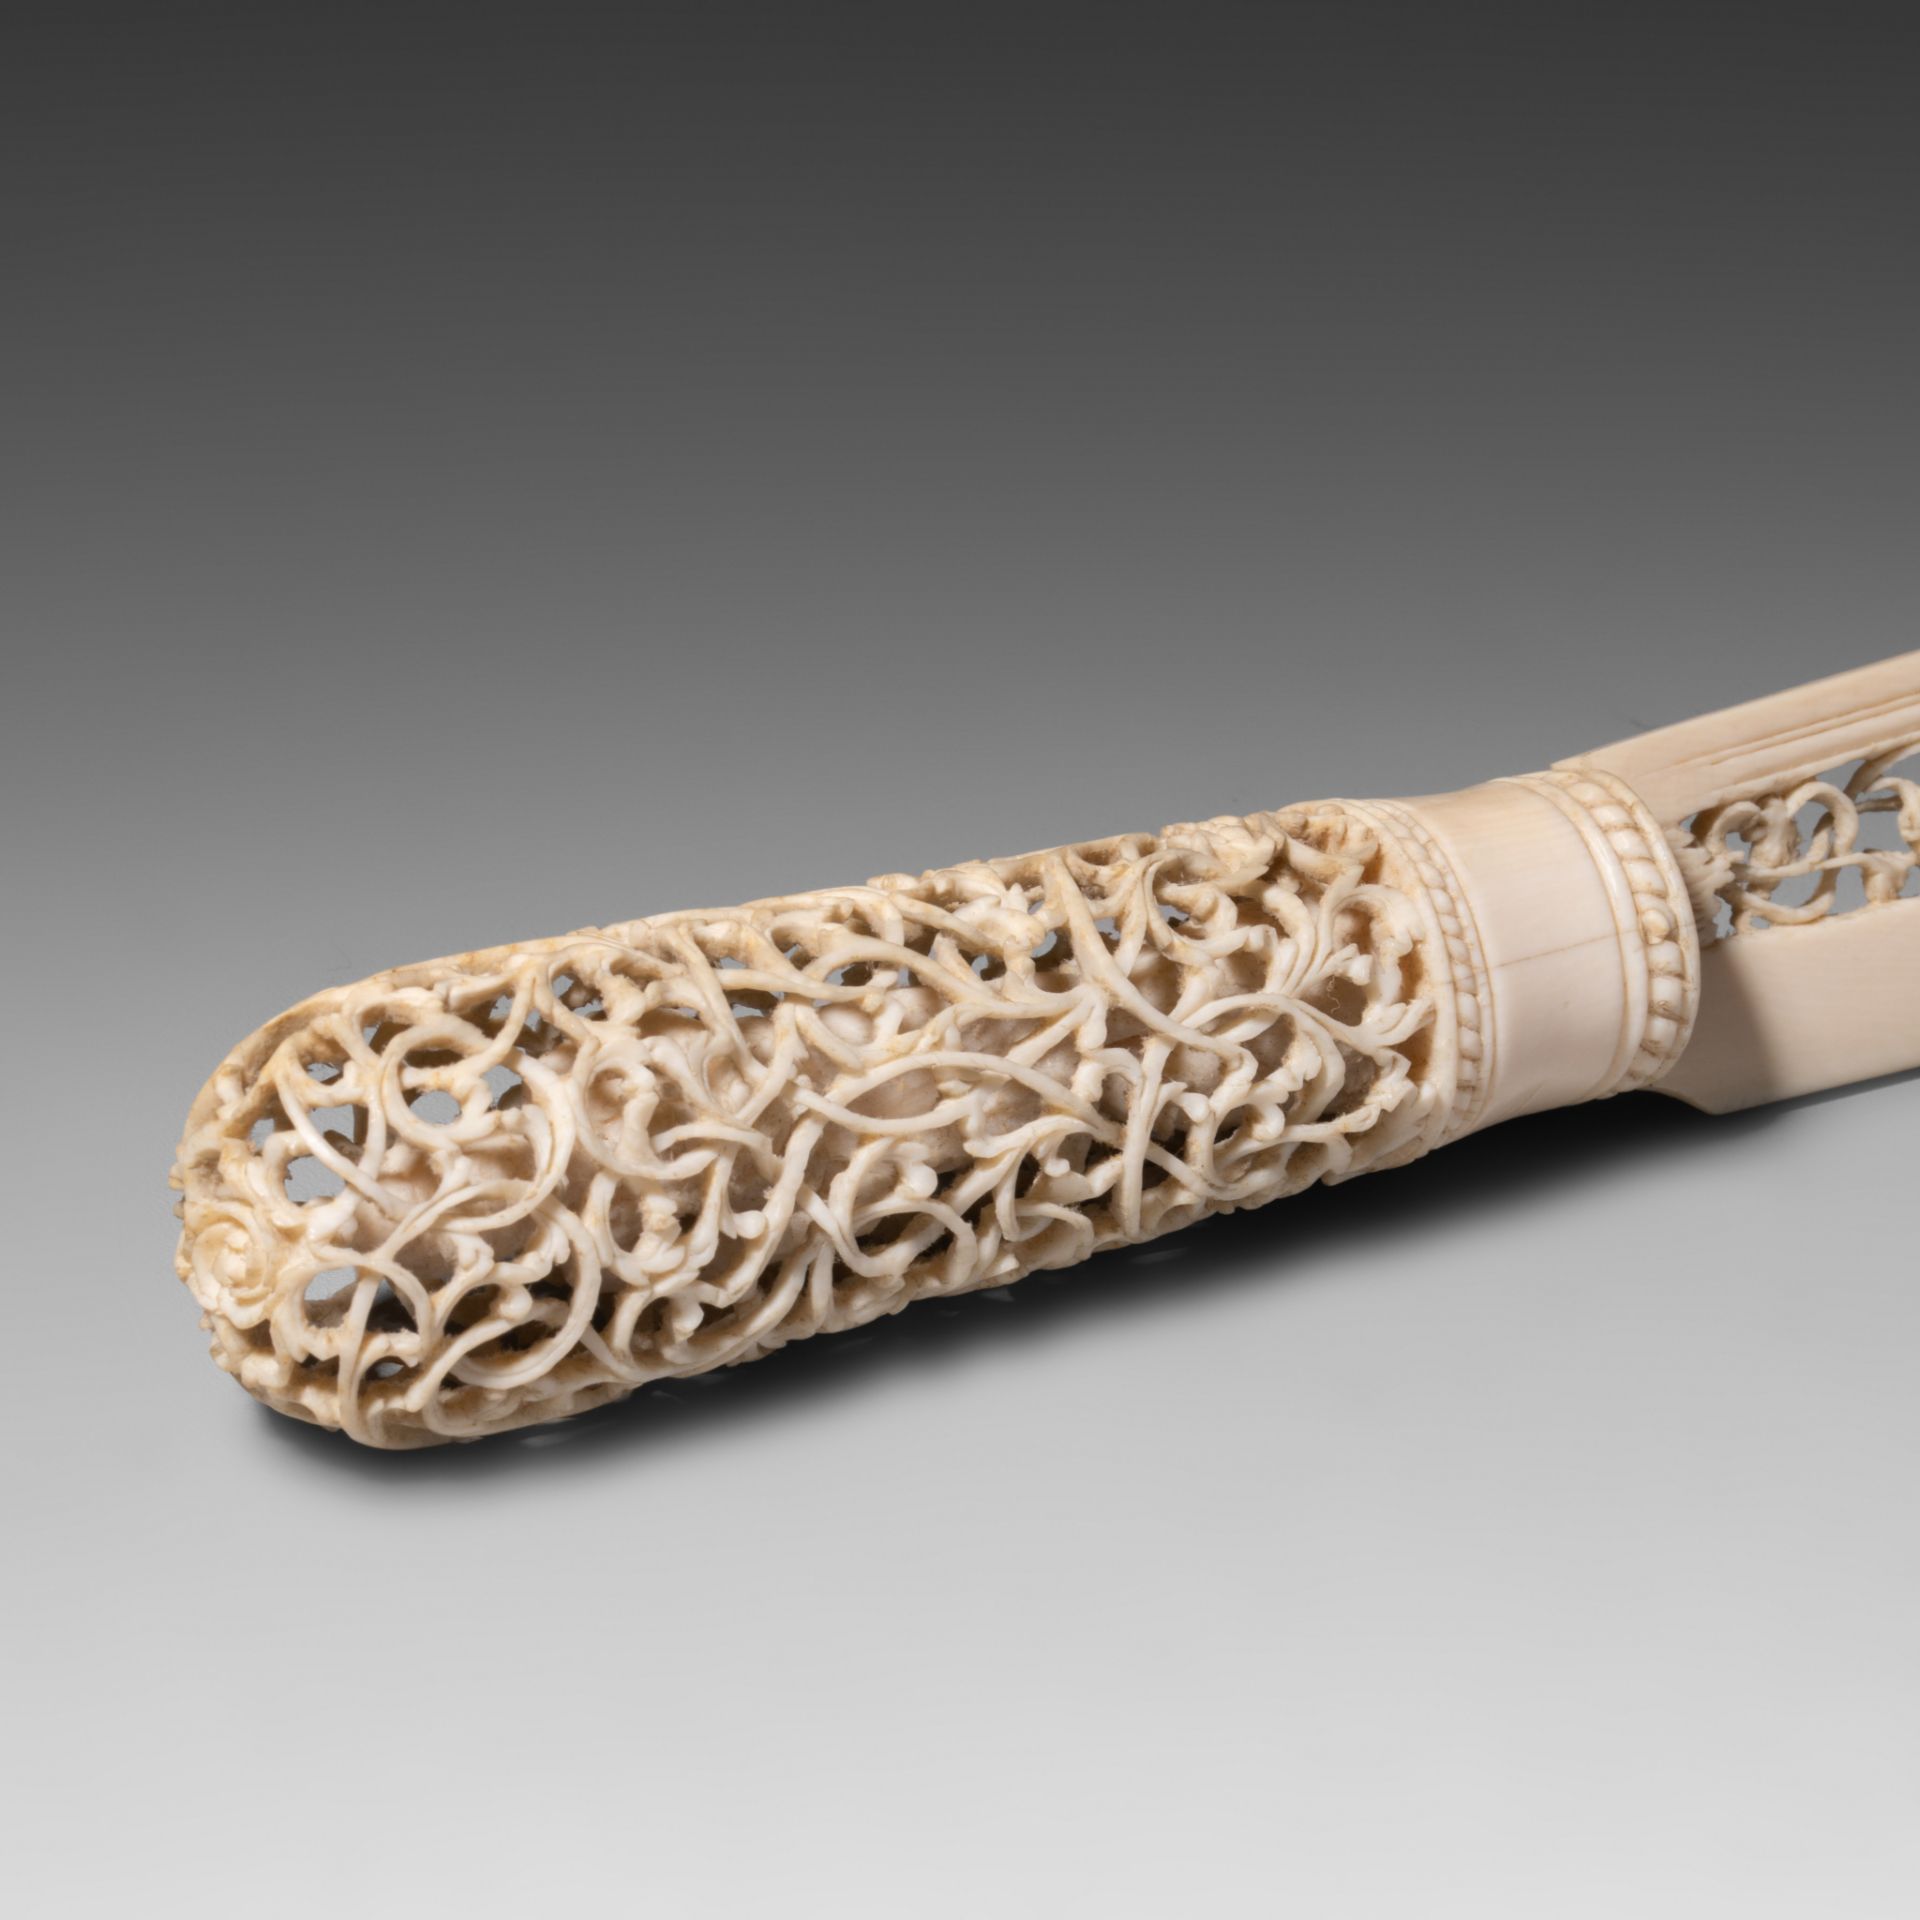 Two Burmese Colonial Ivory paperknives, L 51 cm - 200 g / L 35,8 cm - 80 g, both items are 19th or e - Bild 15 aus 18